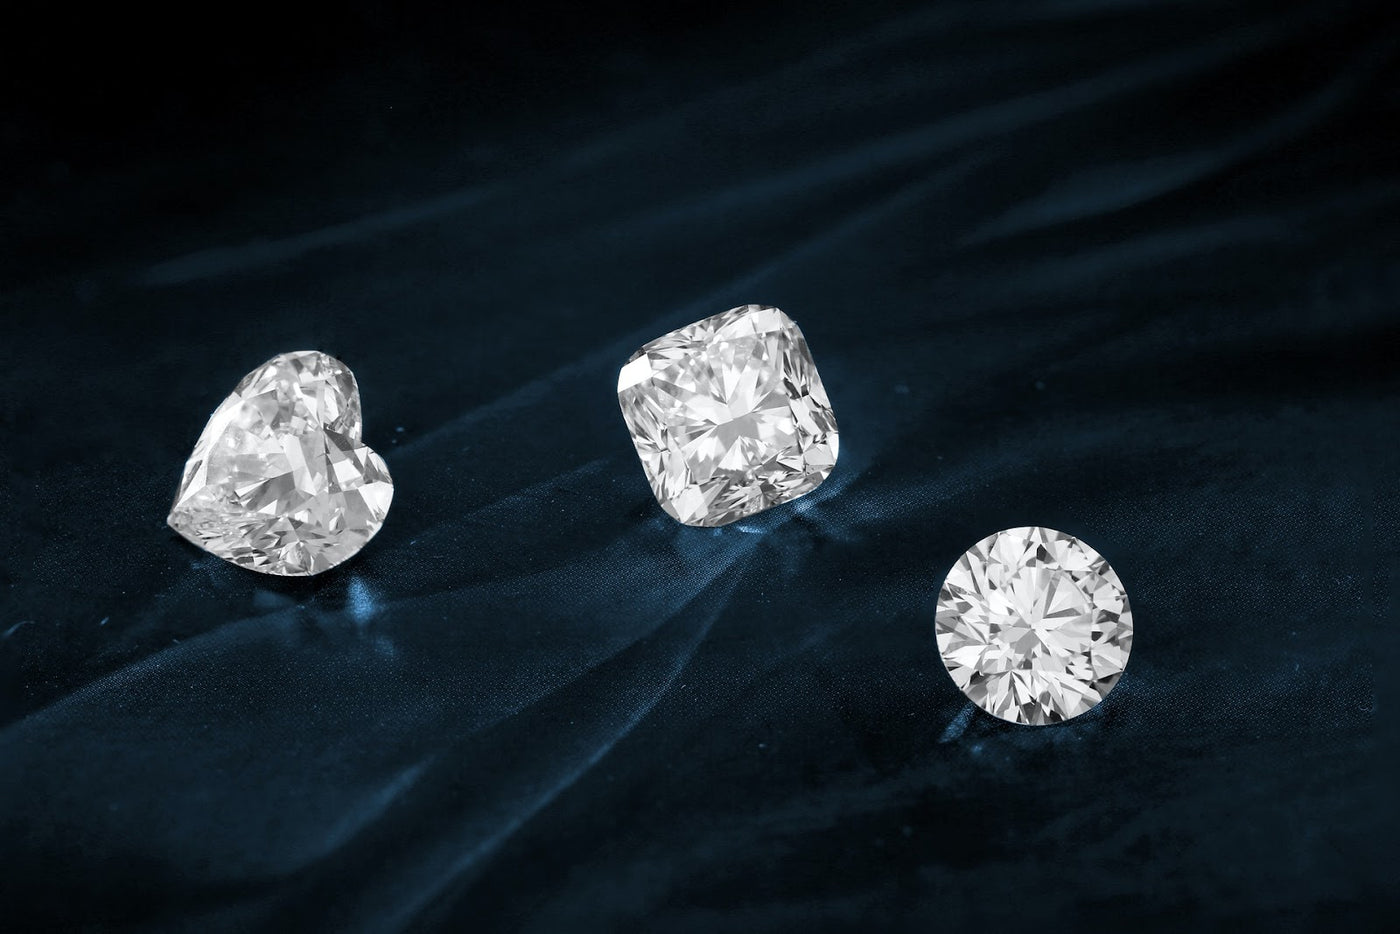 Three differently cut lab-grown diamonds, one heart shaped, one round and one cushion cut on a black background for the 4 C's of diamond grading.